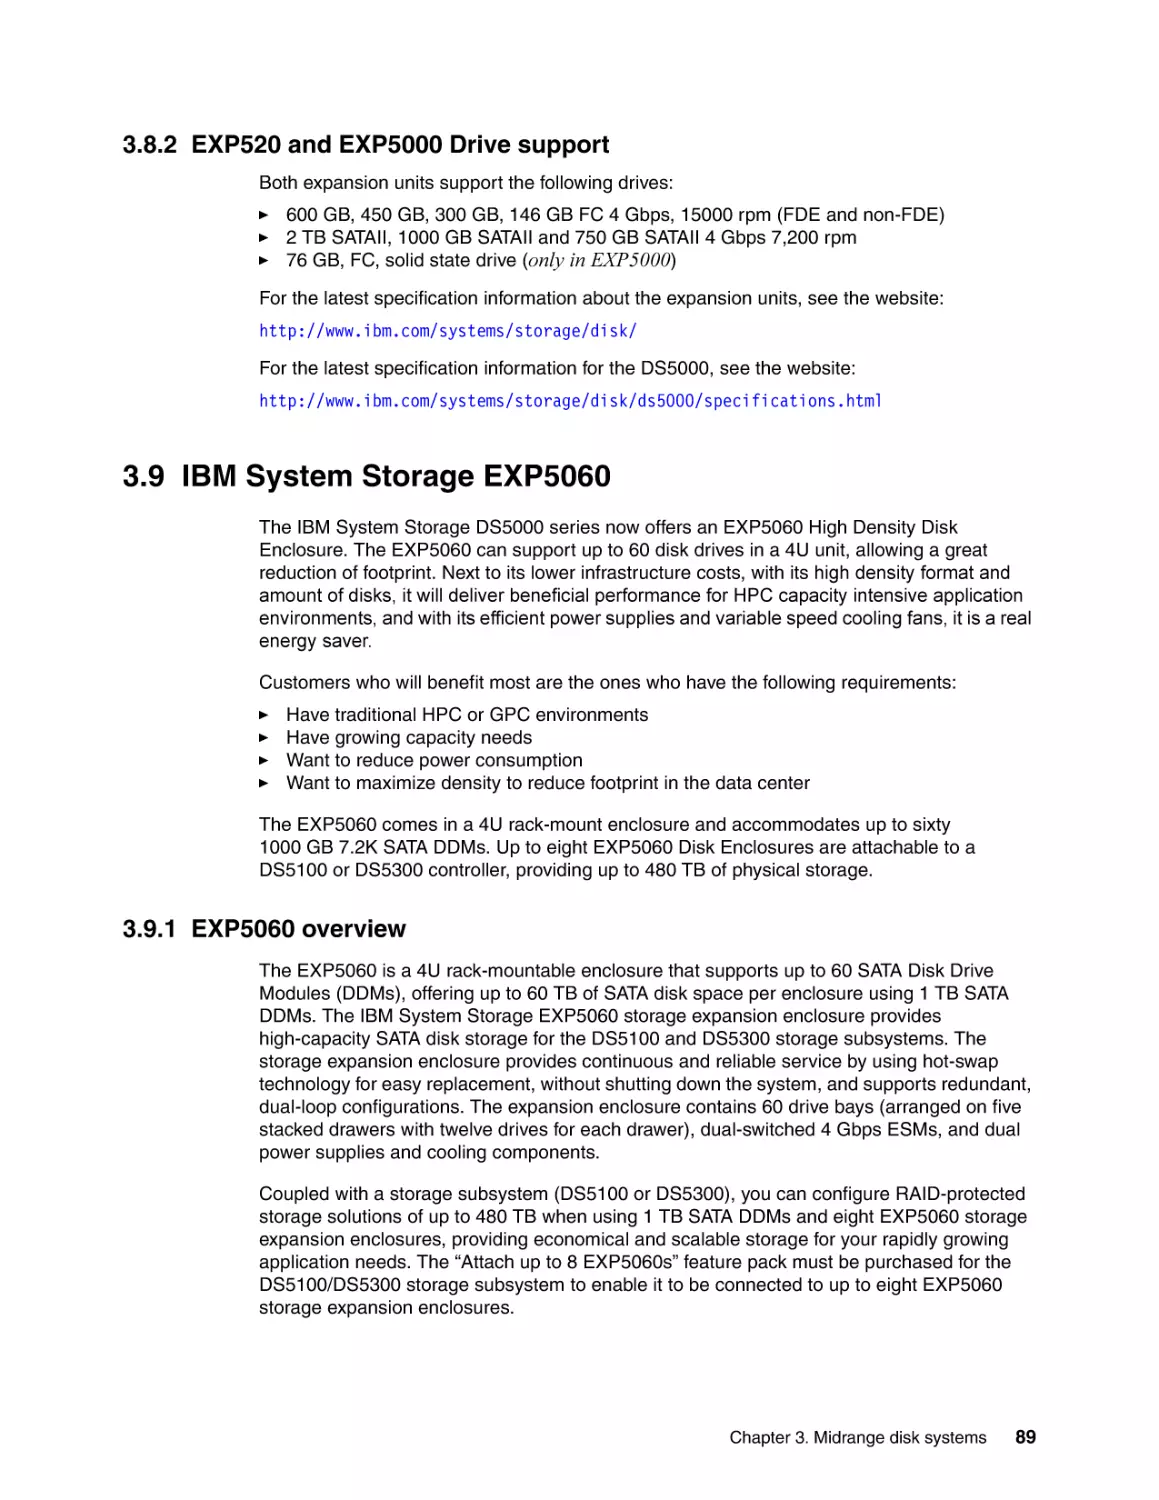 3.8.2 EXP520 and EXP5000 Drive support
3.9 IBM System Storage EXP5060
3.9.1 EXP5060 overview